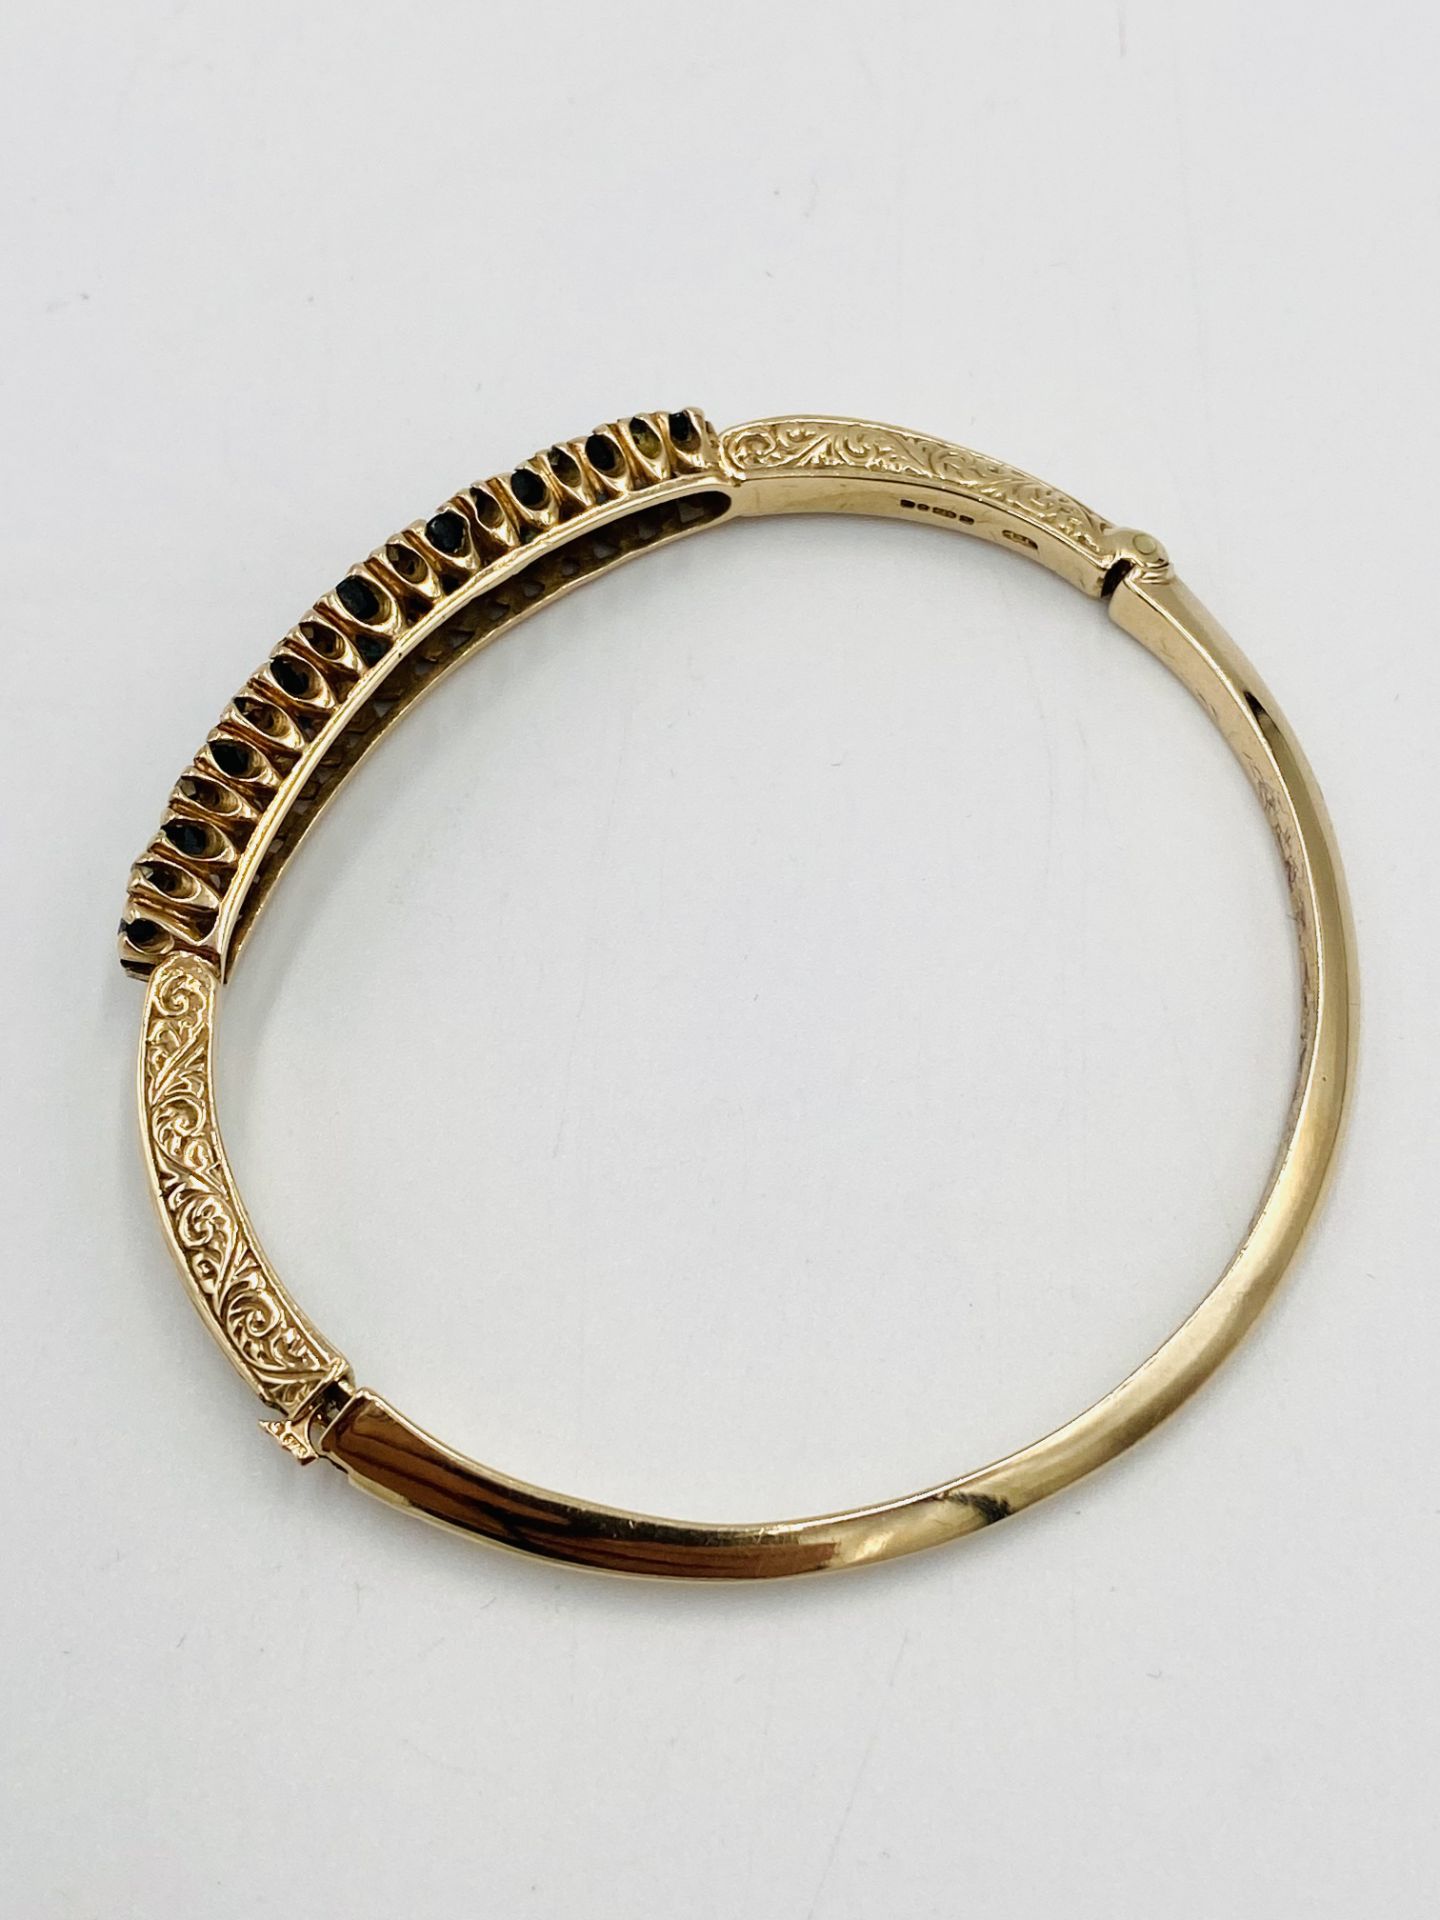 9ct gold and sapphire bracelet - Image 5 of 5